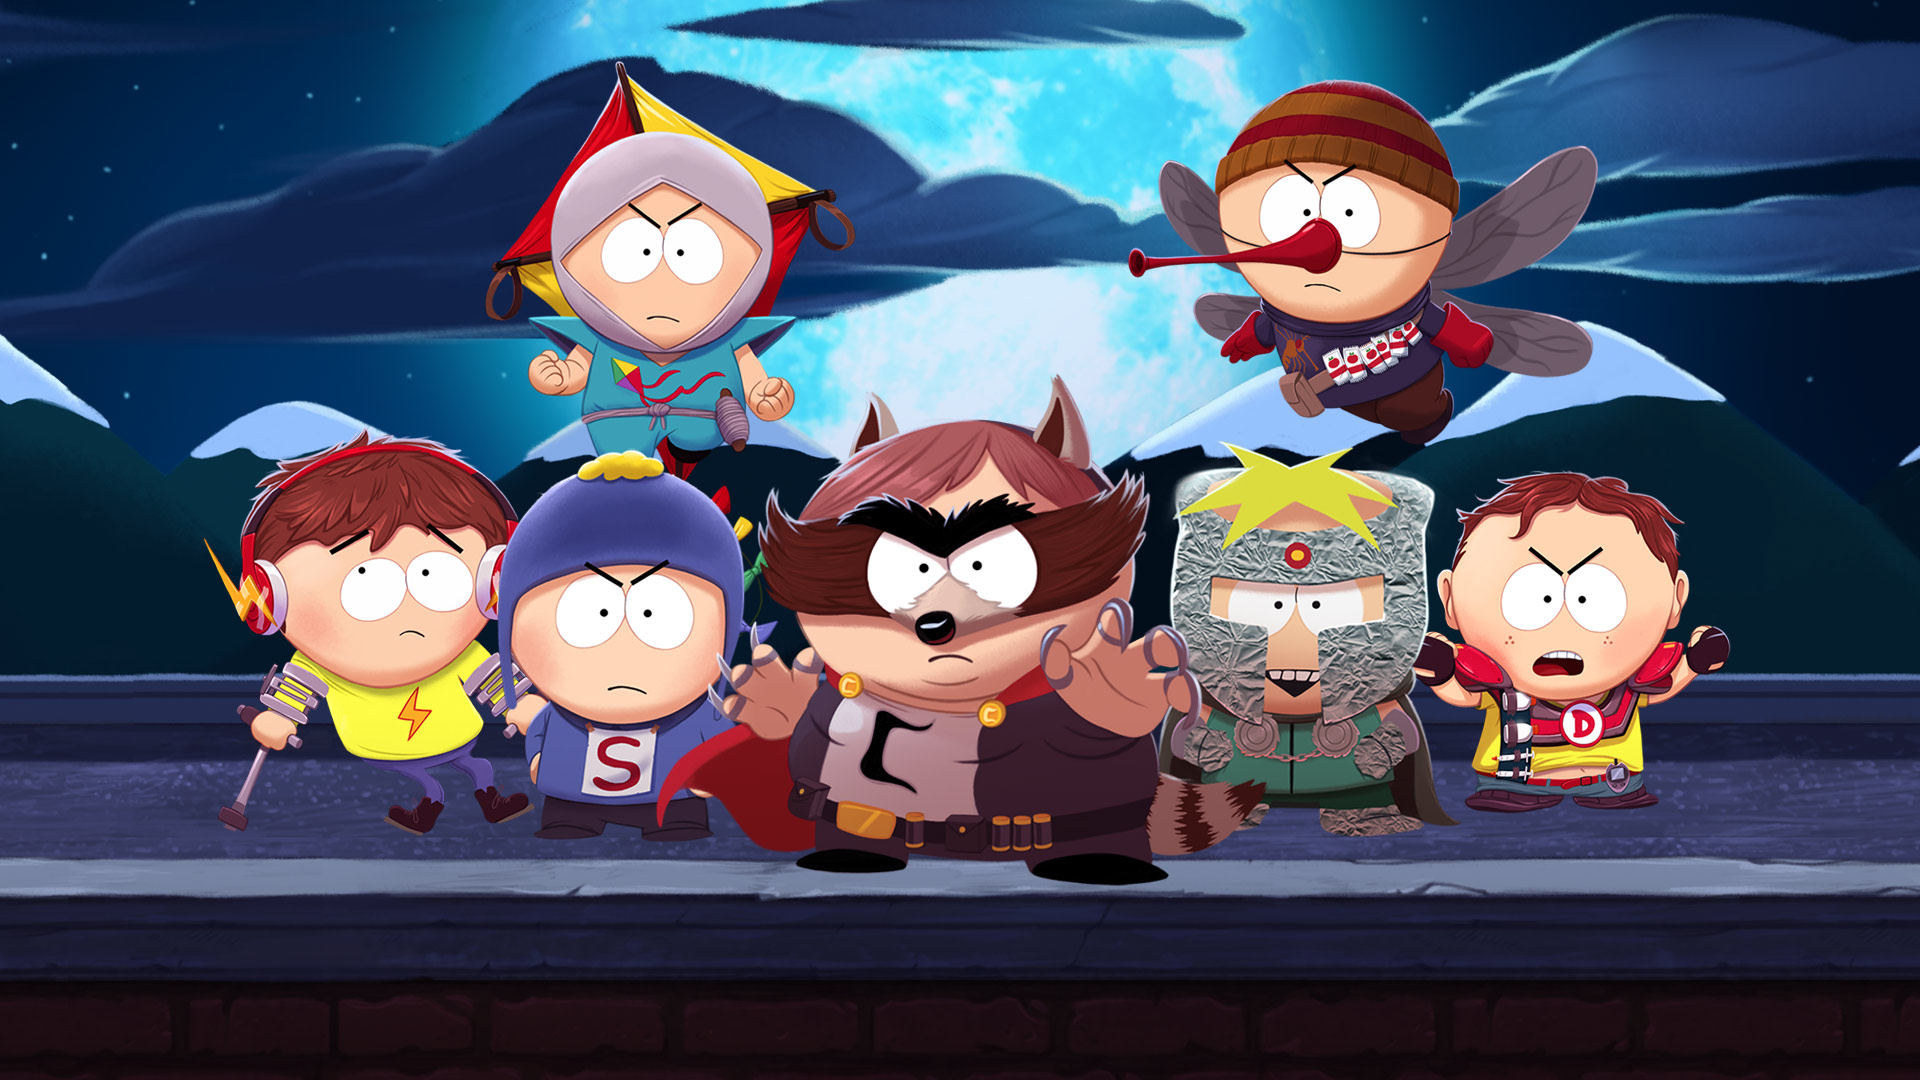 South park on steam фото 91